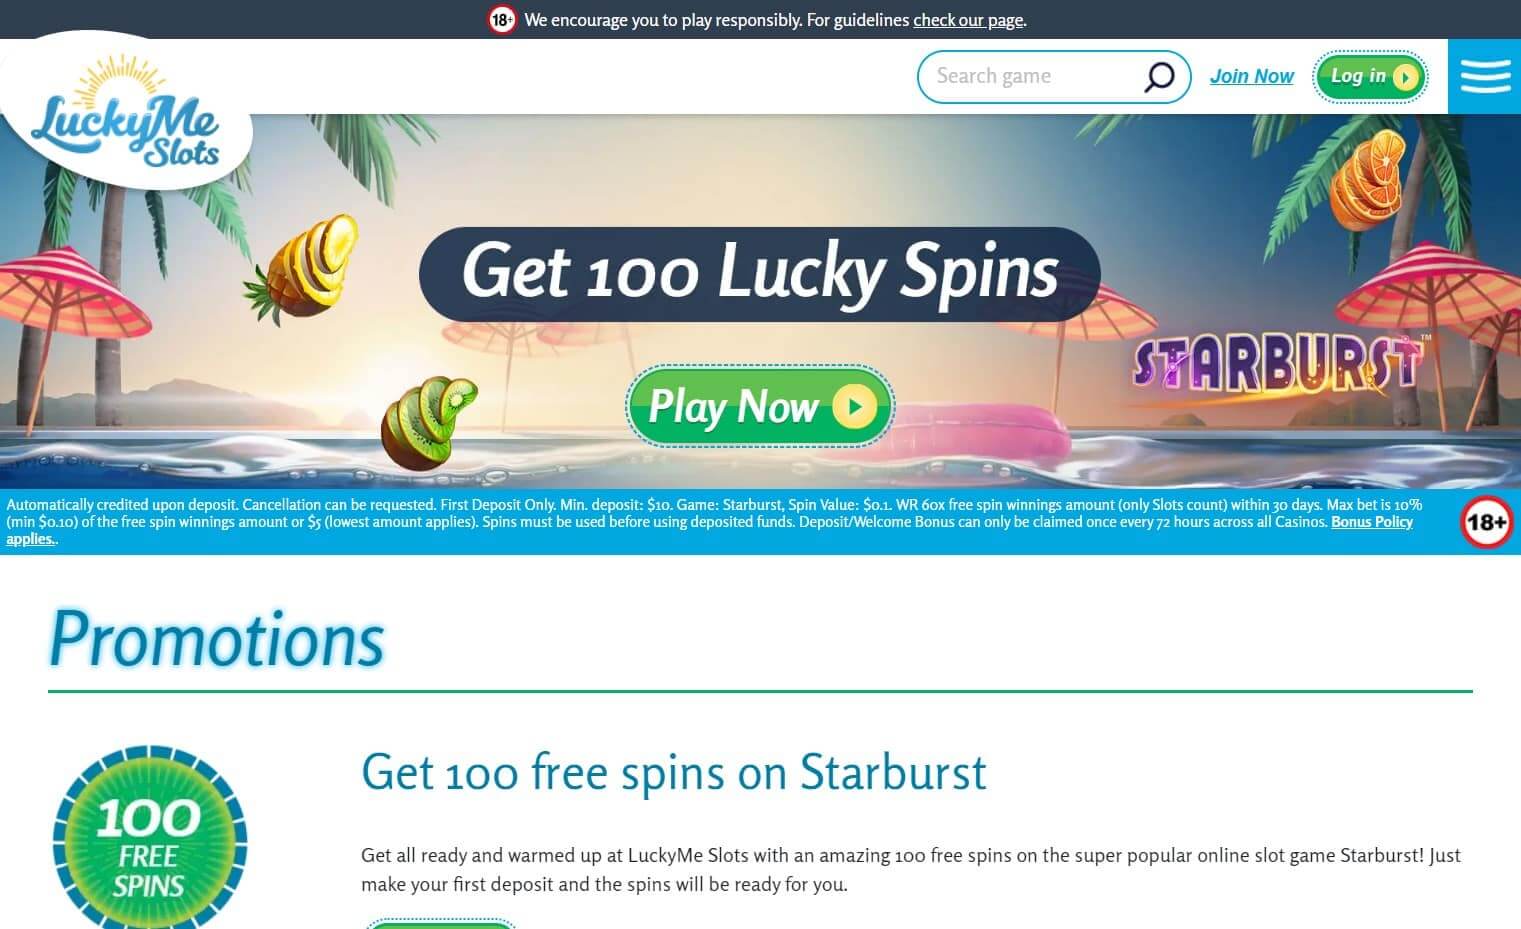 luckyme slots casino review